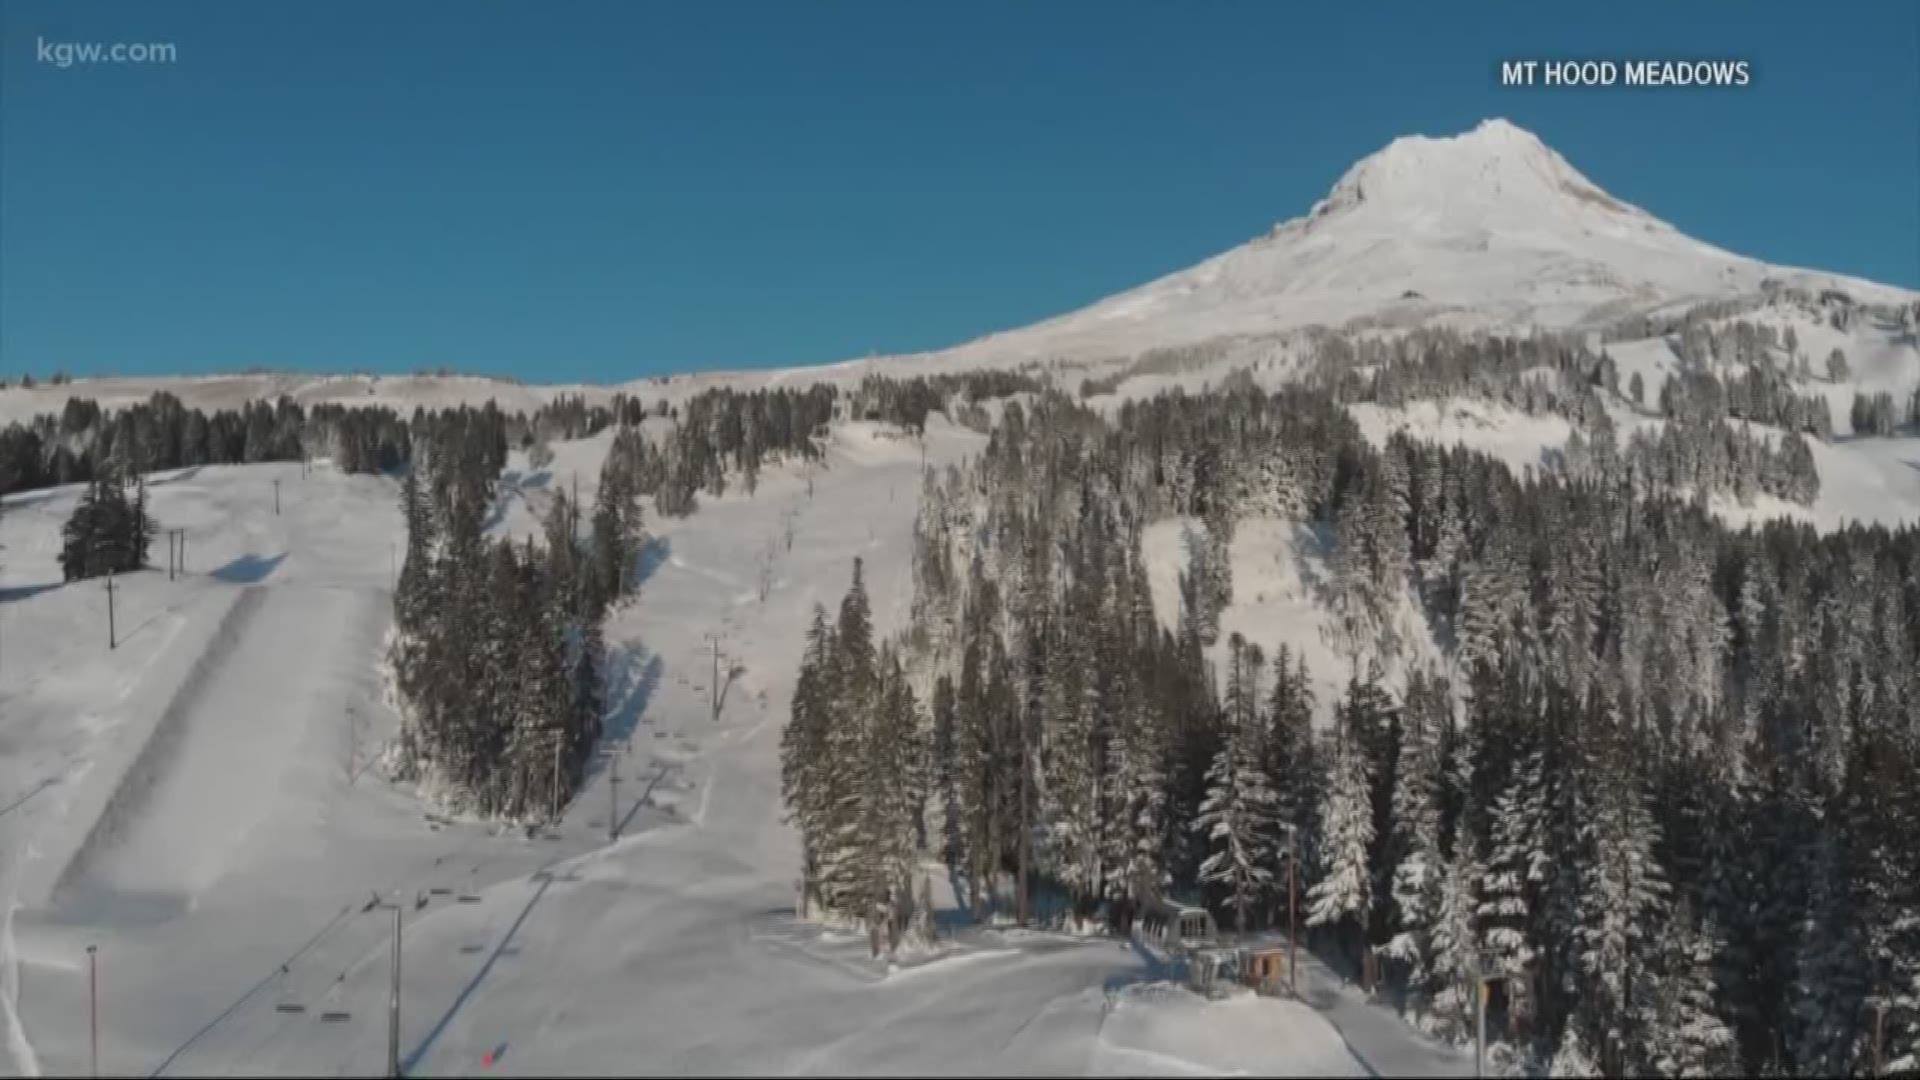 A Portland man died while snowboarding at Meadows.